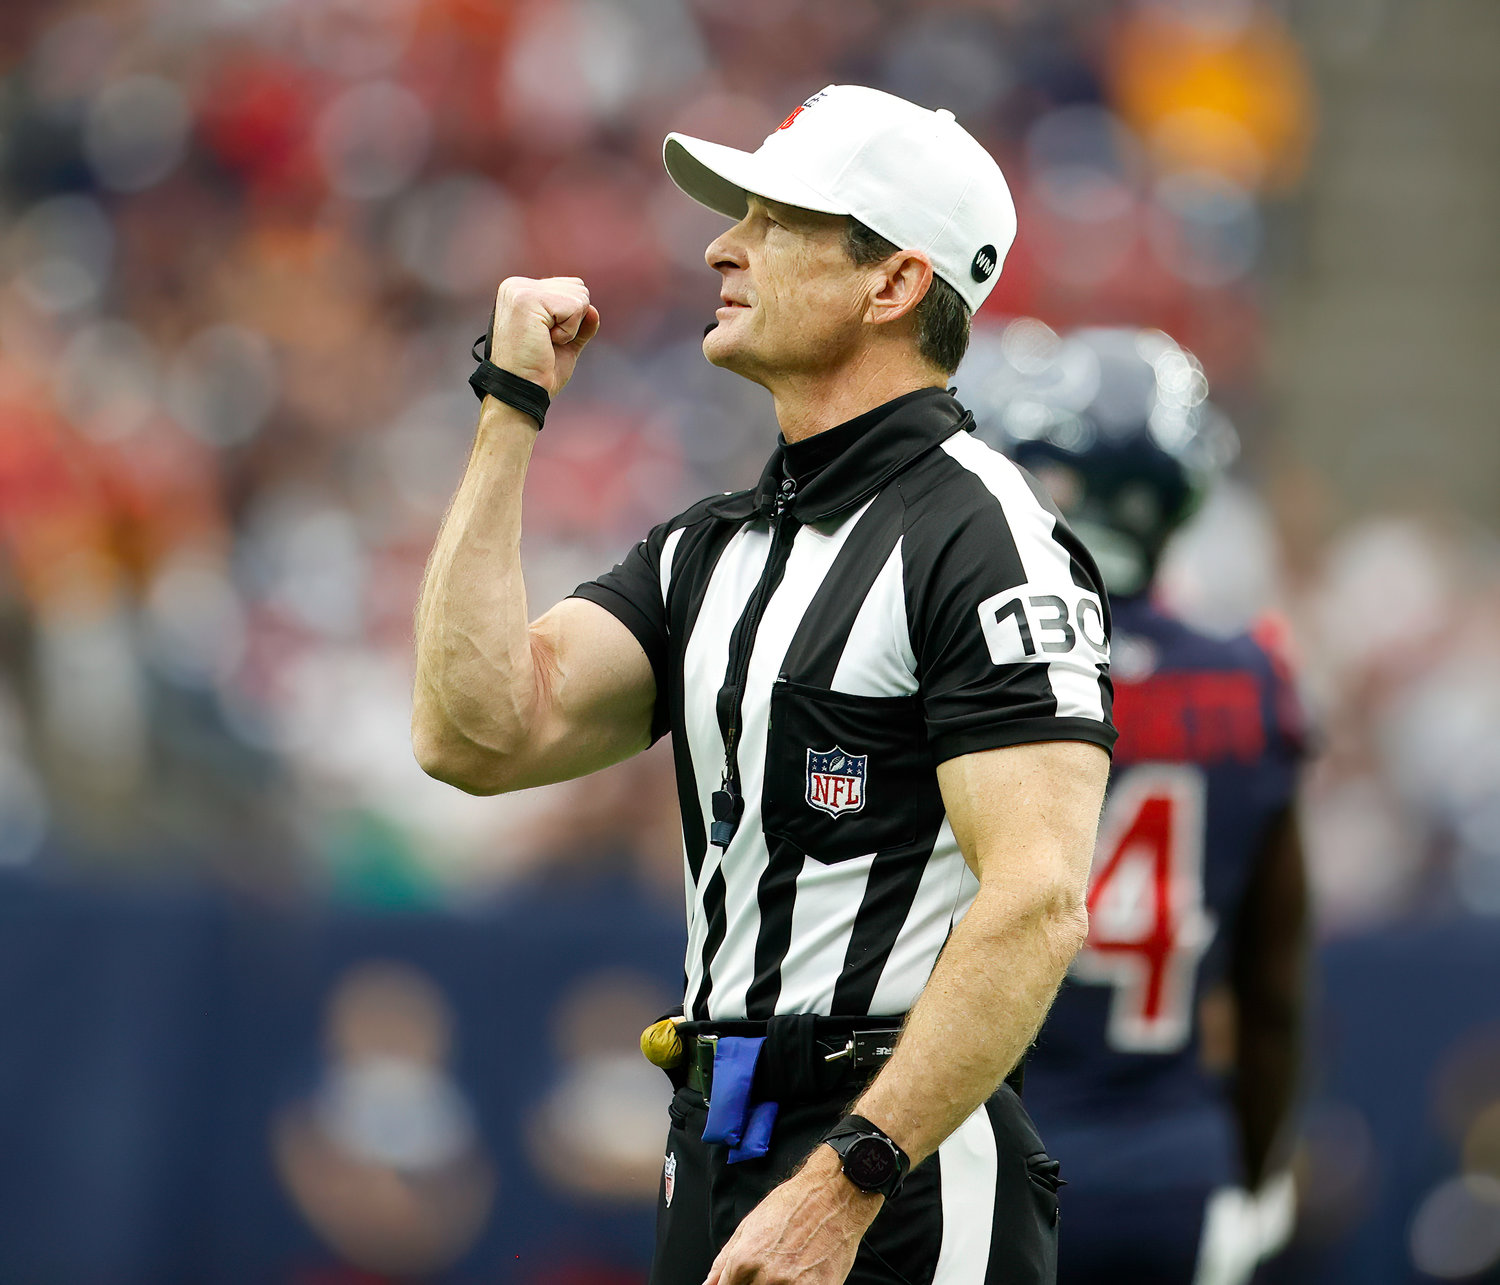 Referee Land Clark (130) signals for a facemask penalty against the Houston Texans during an NFL game between the Texans and the Cleveland Browns on Dec. 4, 2022, in Houston. The Browns won, 27-14.